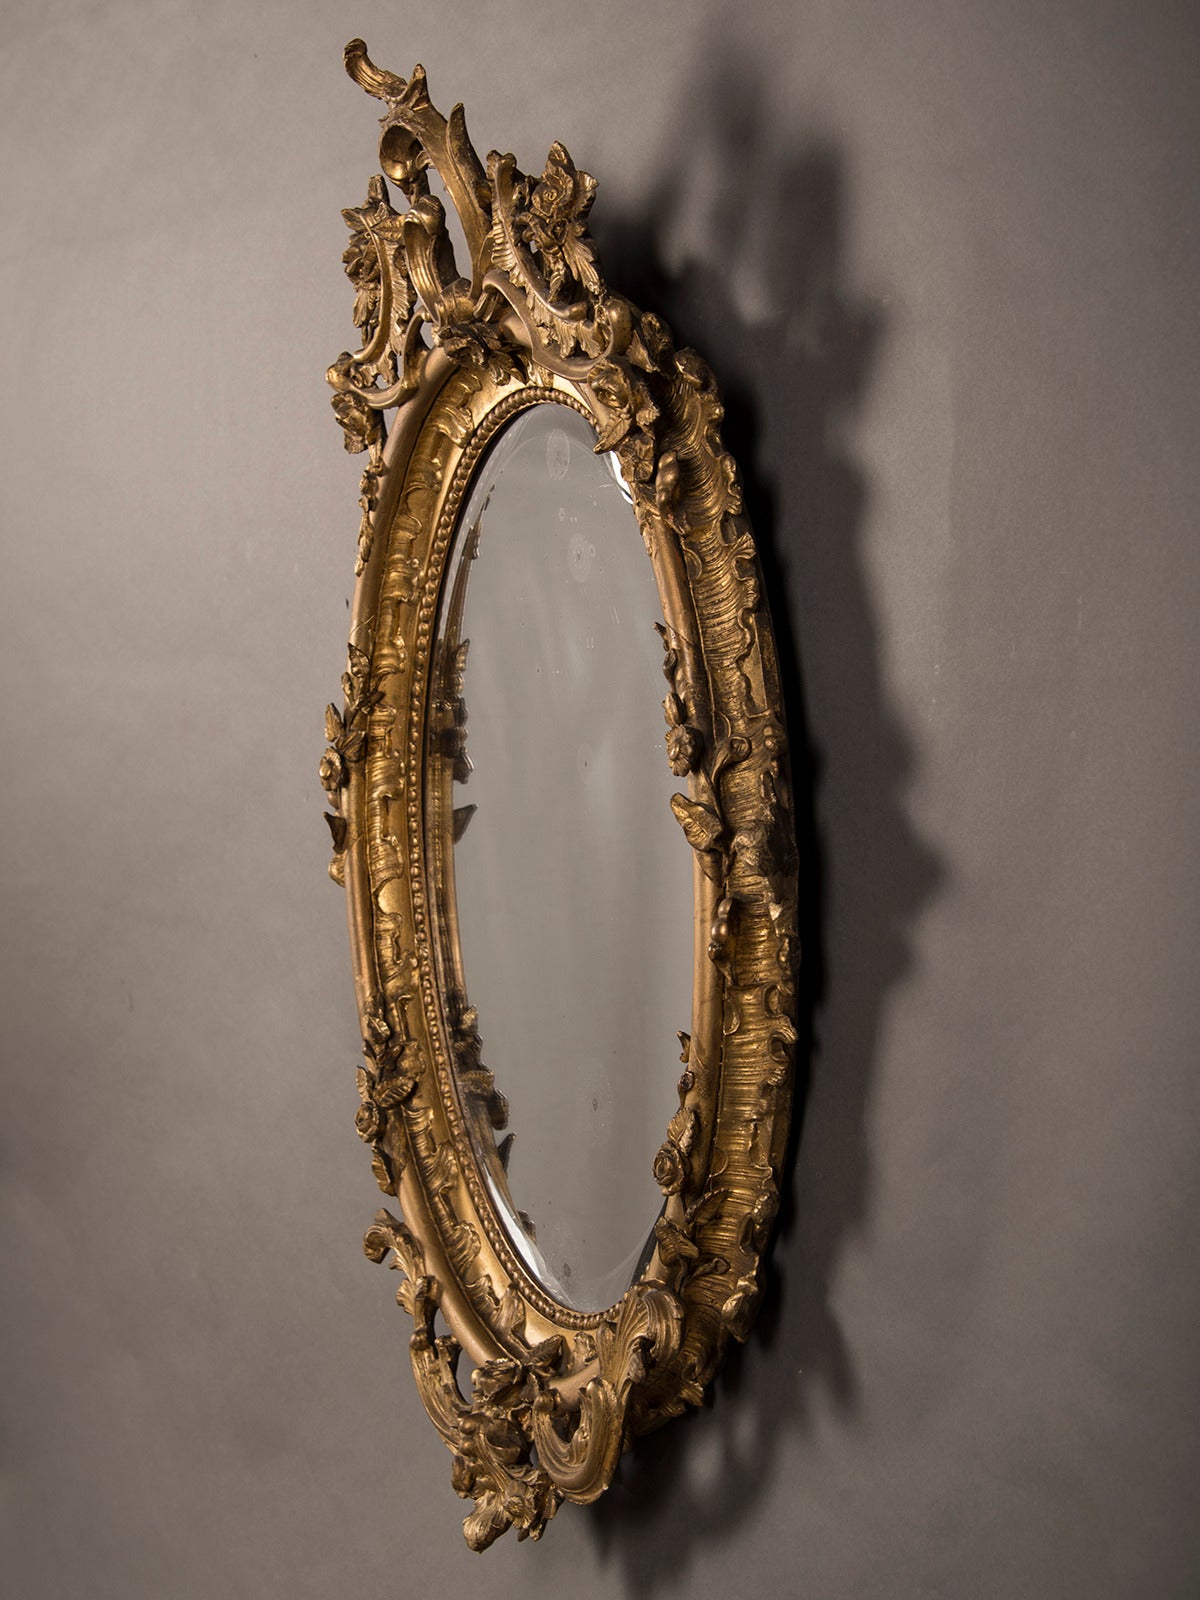 Gilt Gilded Oval Mirror from Belle Epoque Period France circa 1890 (32